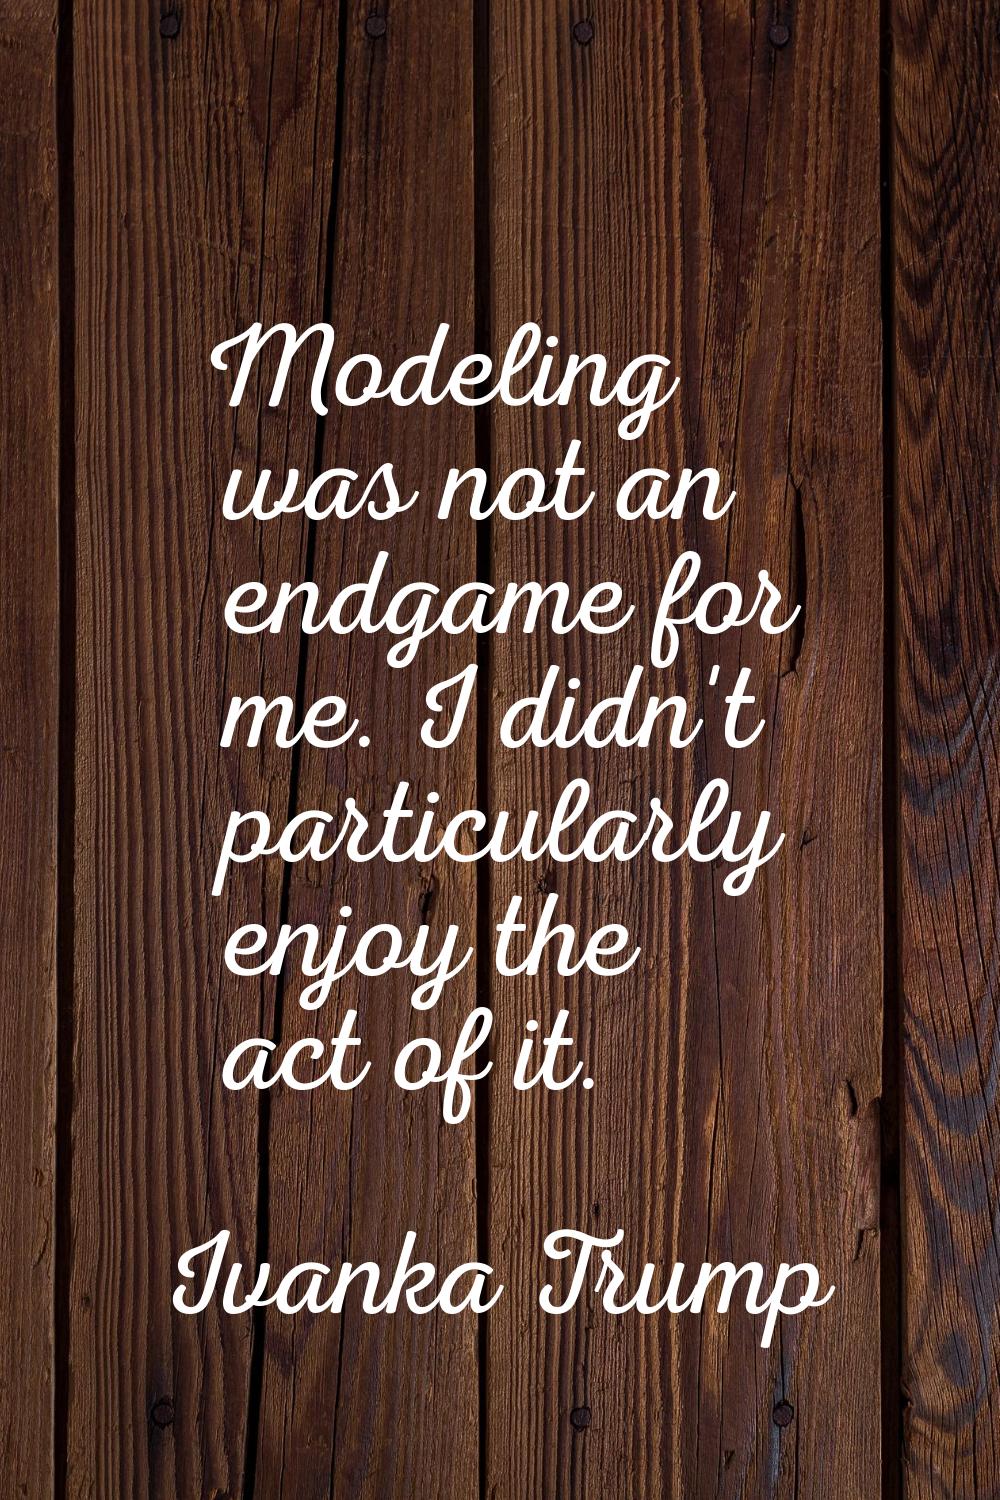 Modeling was not an endgame for me. I didn't particularly enjoy the act of it.